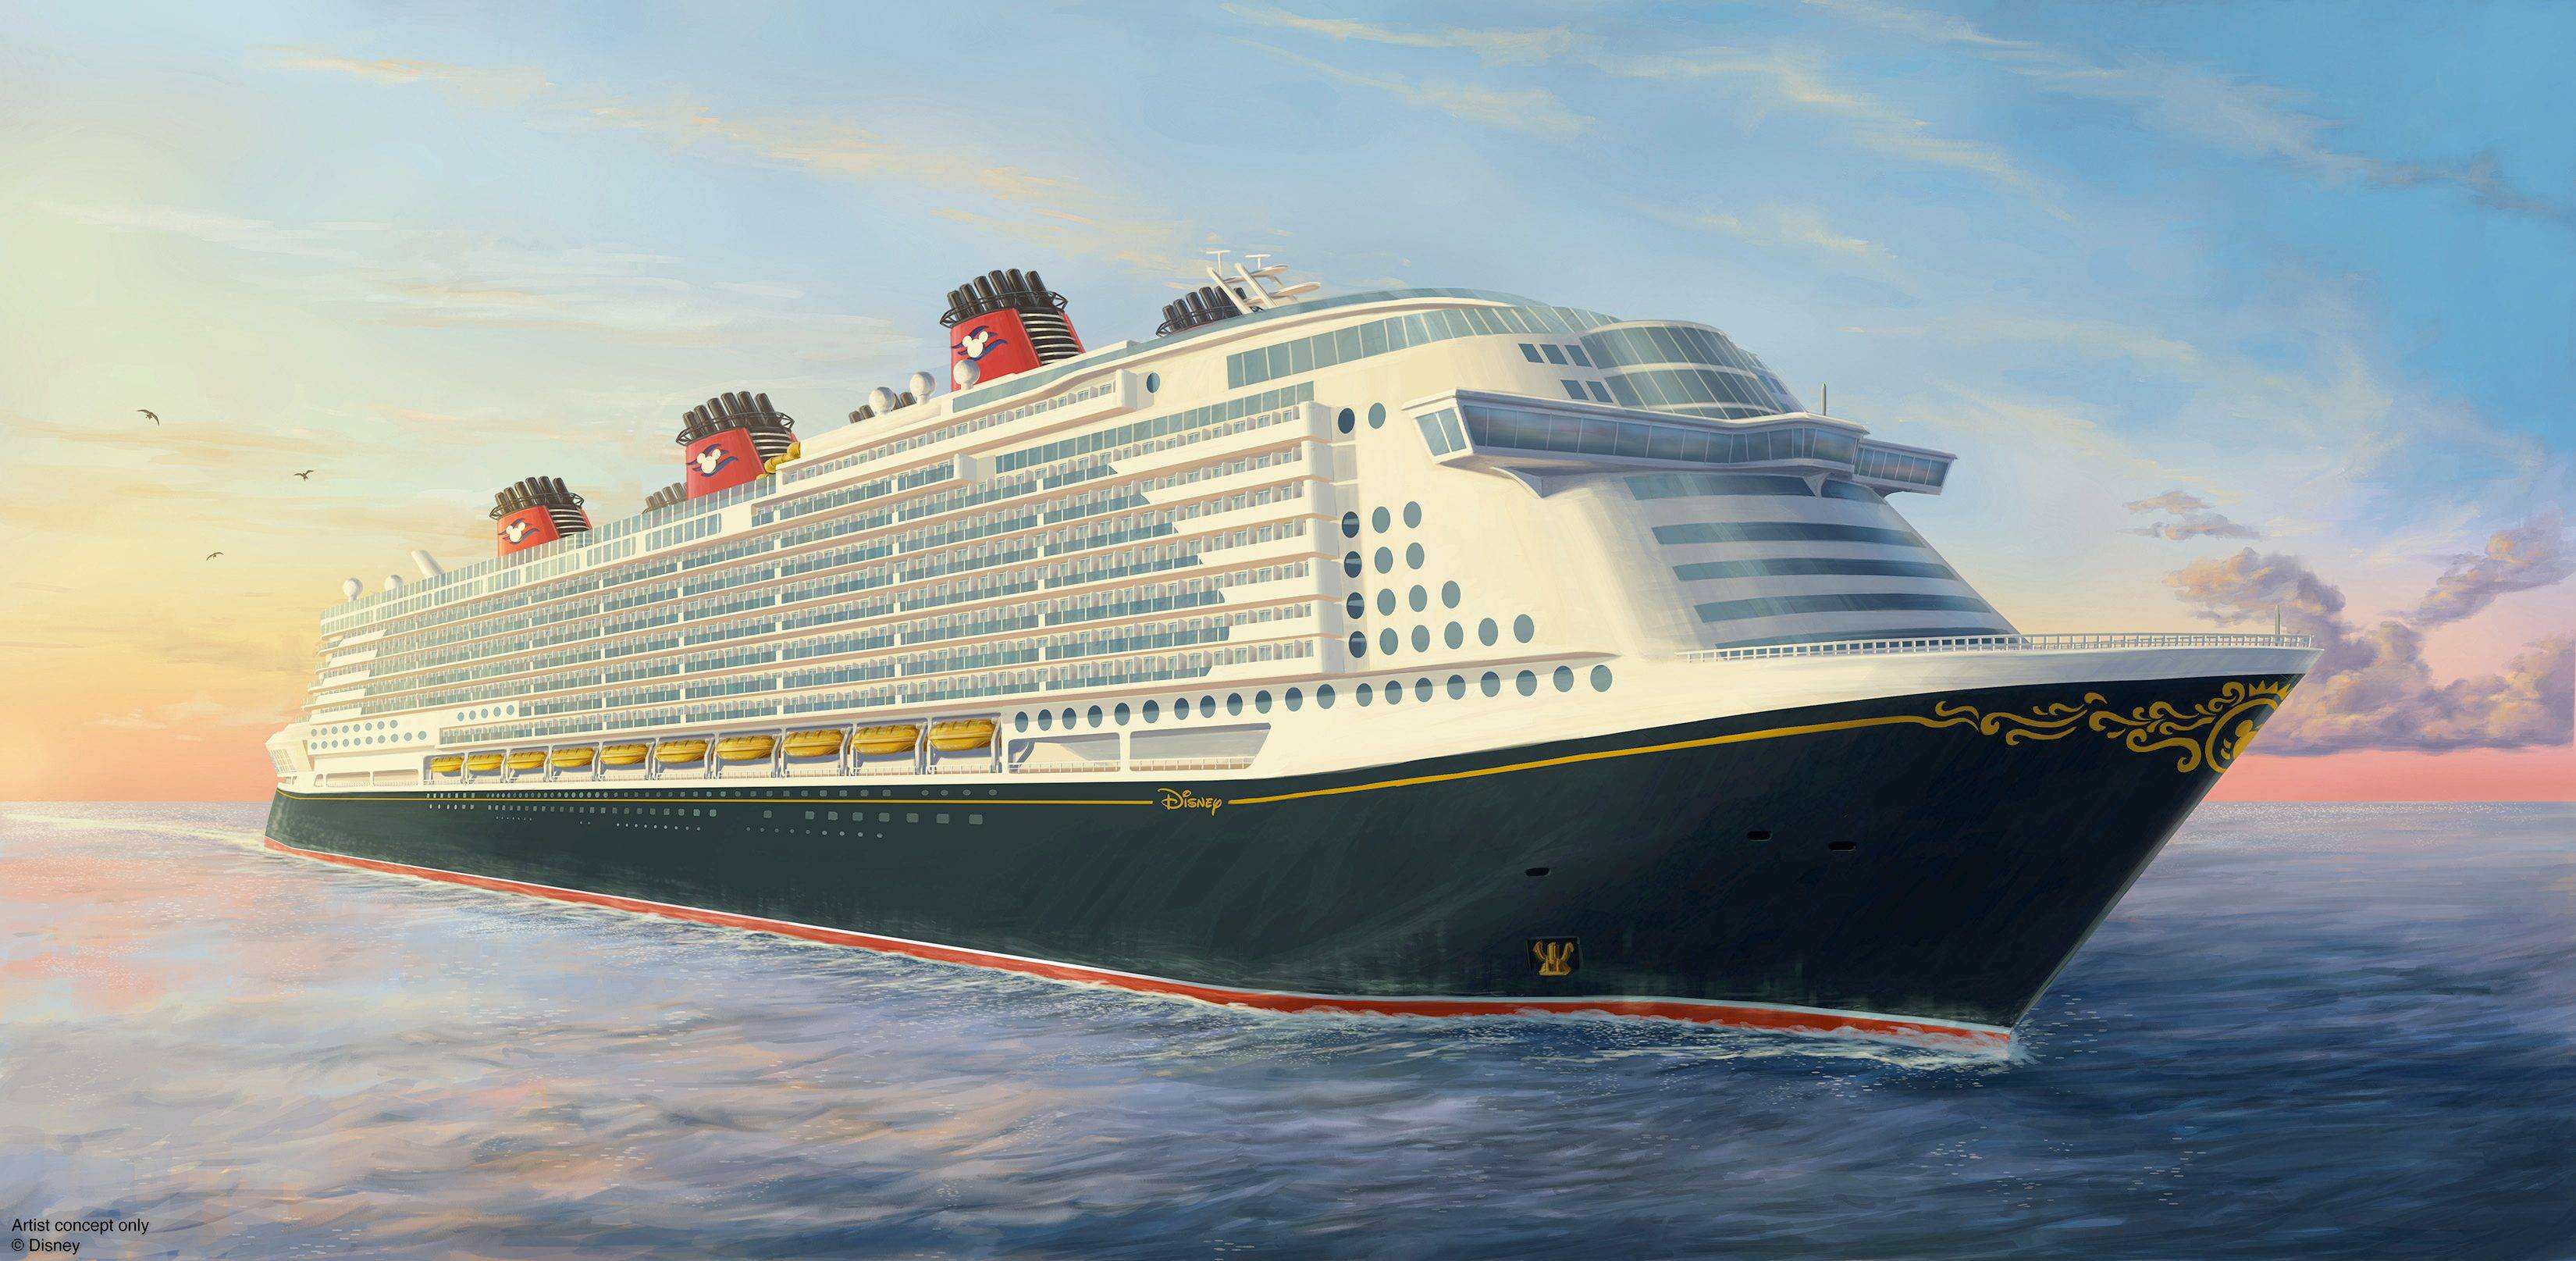 Disney's partially completed cruise ship purchase was reportedly acquired at a bargain price